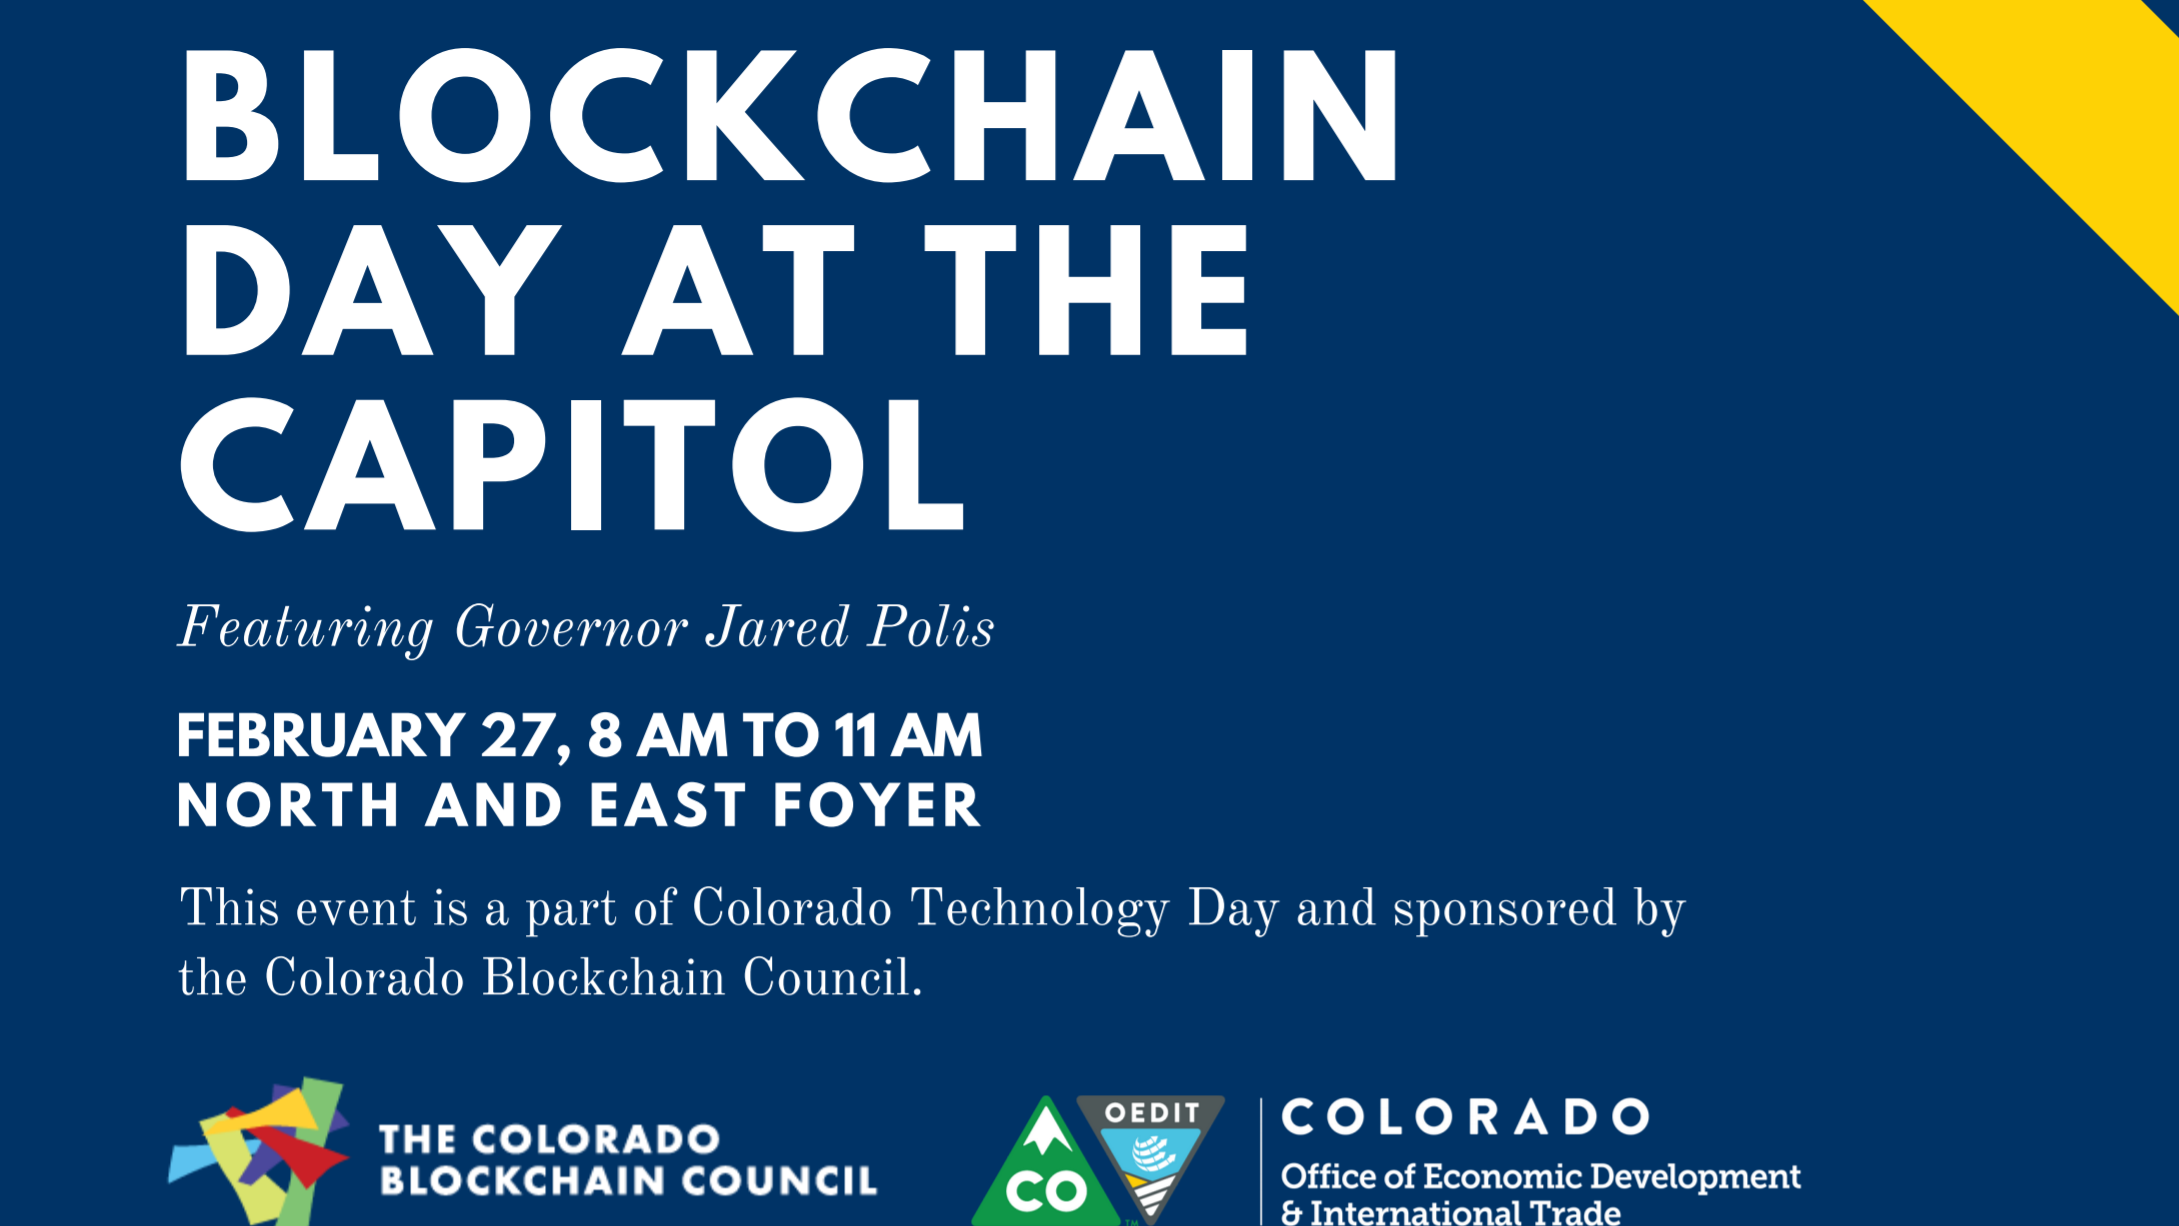 Blockchain Day at the Capitol